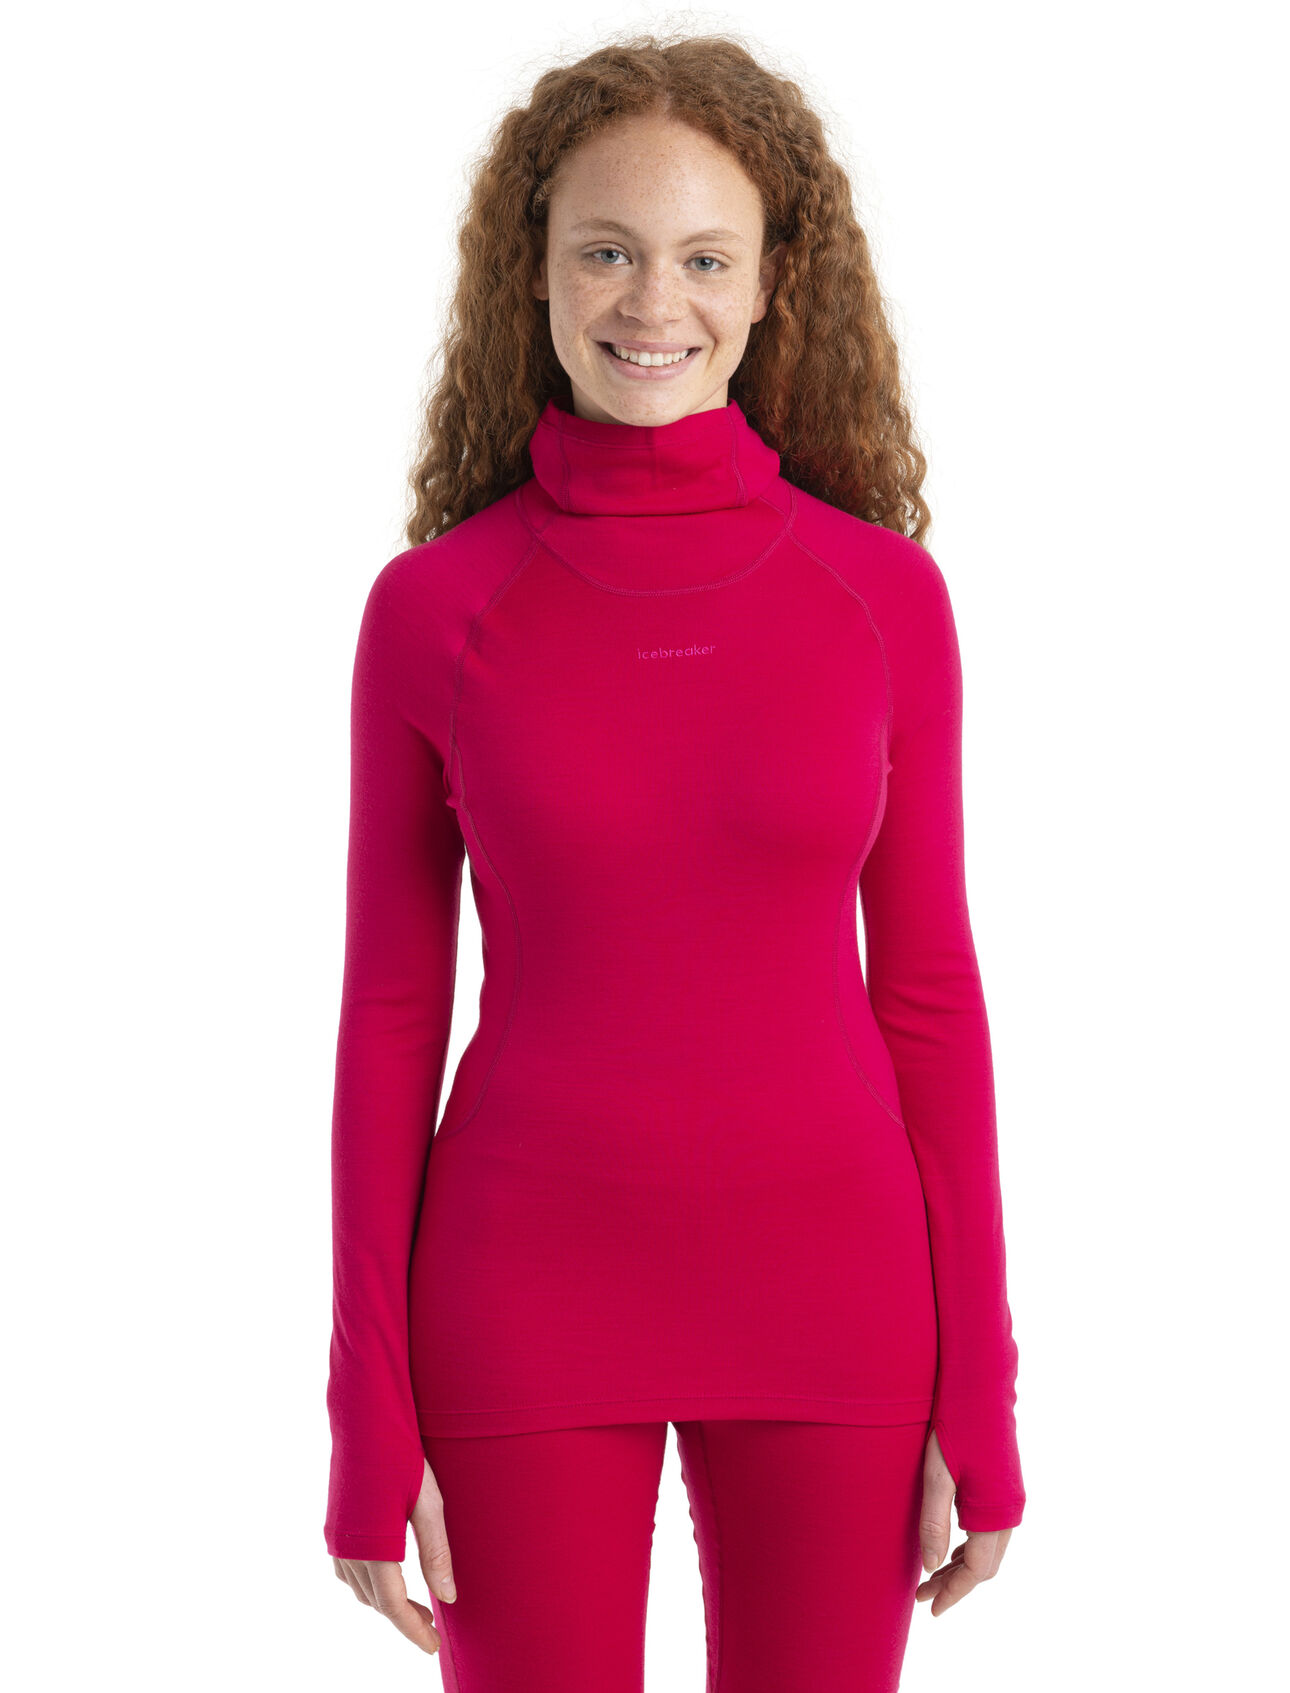 Womens 300 MerinoFine™ Long Sleeve Roll Neck Thermal Top A premium, slim-fit base layer made with luxuriously soft 15.5 micron merino wool fibers and a high-neck design for added protection, the MerinoFine™ Long Sleeve Roll Neck is at the intersection of comfort and performance.